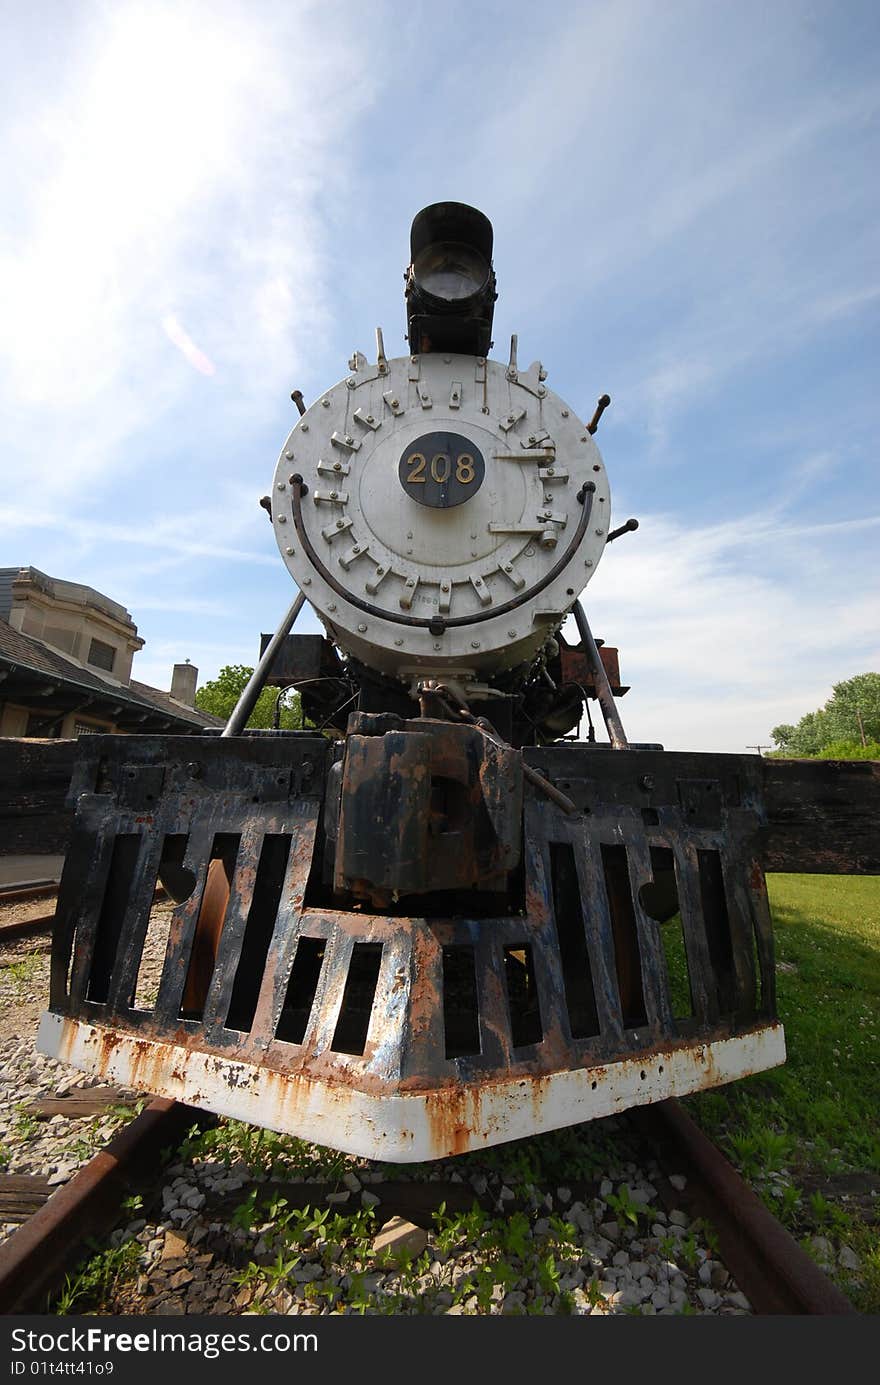 Image taken of an old train resting at French Lick train station